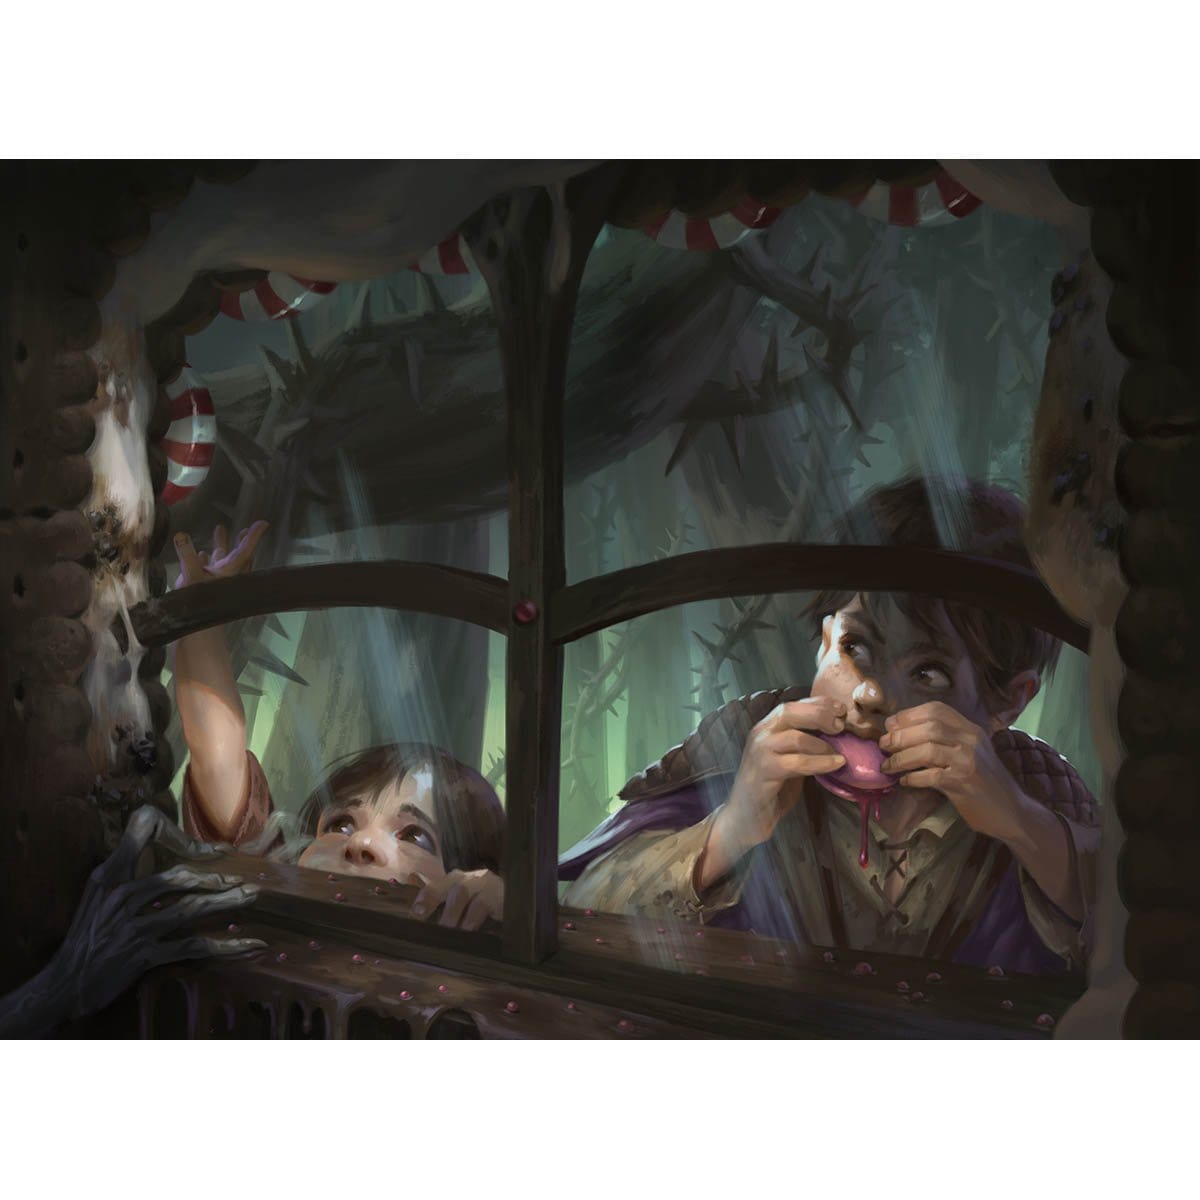 Curious Pair Print - Print - Original Magic Art - Accessories for Magic the Gathering and other card games